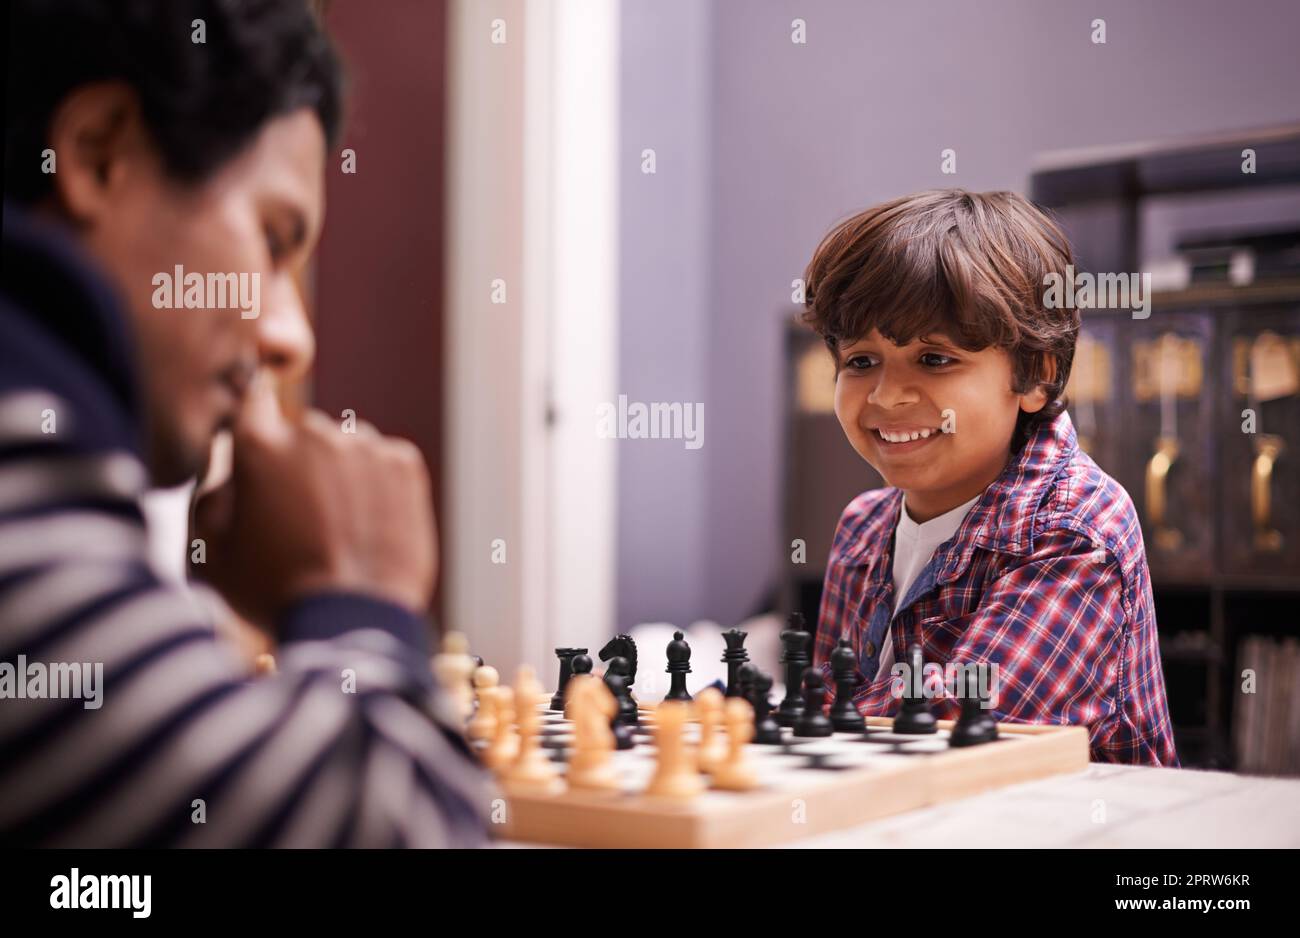 Think as hard as you want. a father and son playing chess at home. Stock Photo